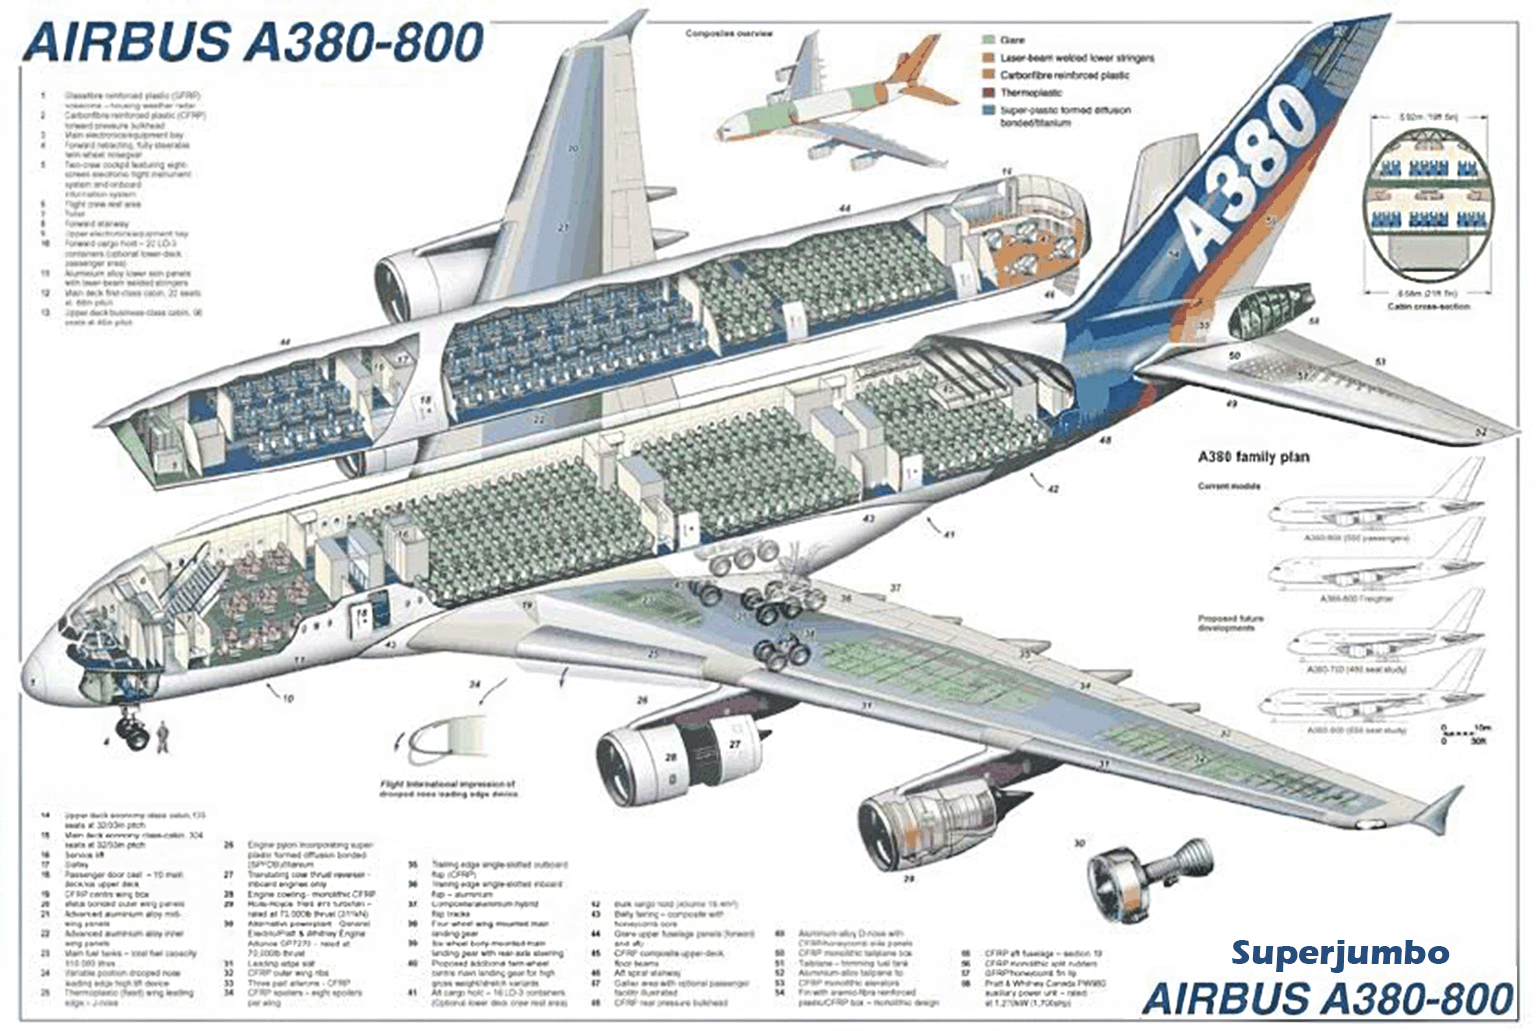 10 years in the skies the A380’s numbers add up